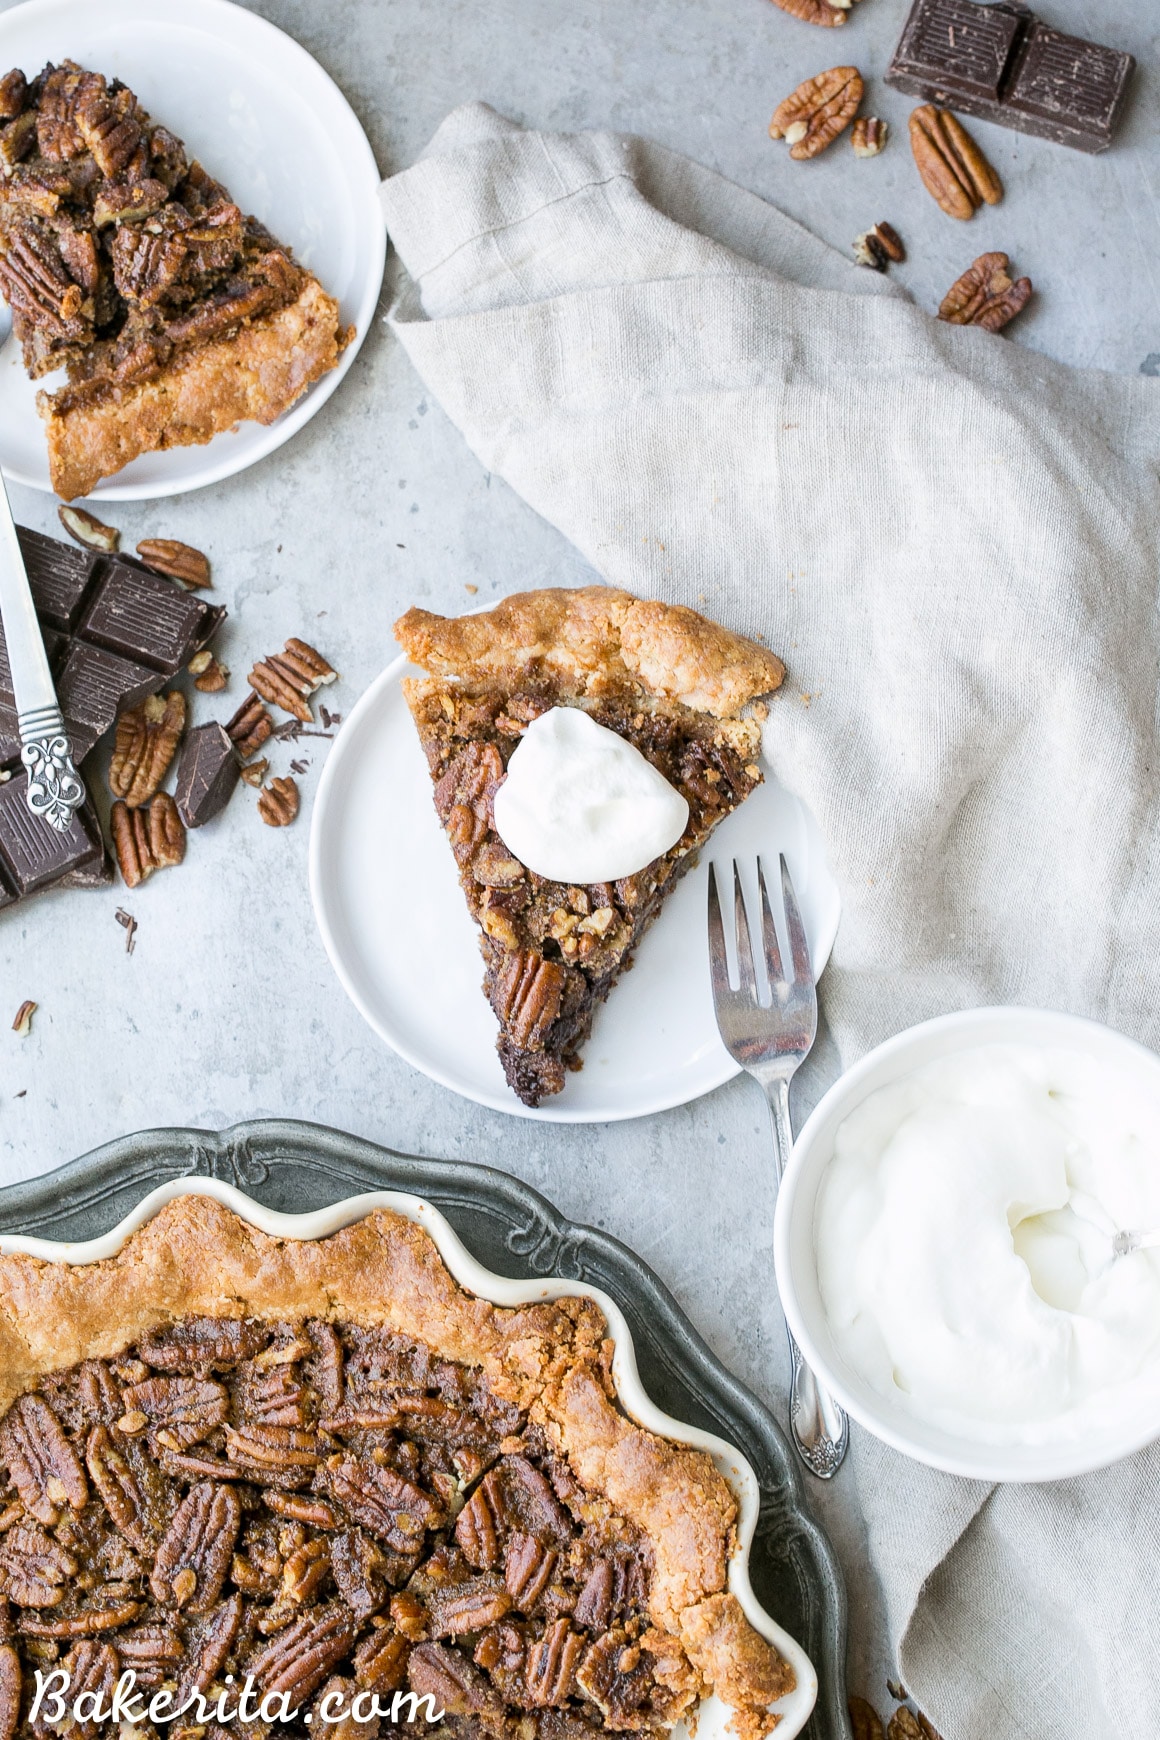 This Paleo Chocolate Pecan Pie has a flaky grain-free pie crust and a layer of chocolate ganache! This gluten-free and refined sugar-free pie is gooey, crunchy, and the perfect addition to your holiday dessert line-up.